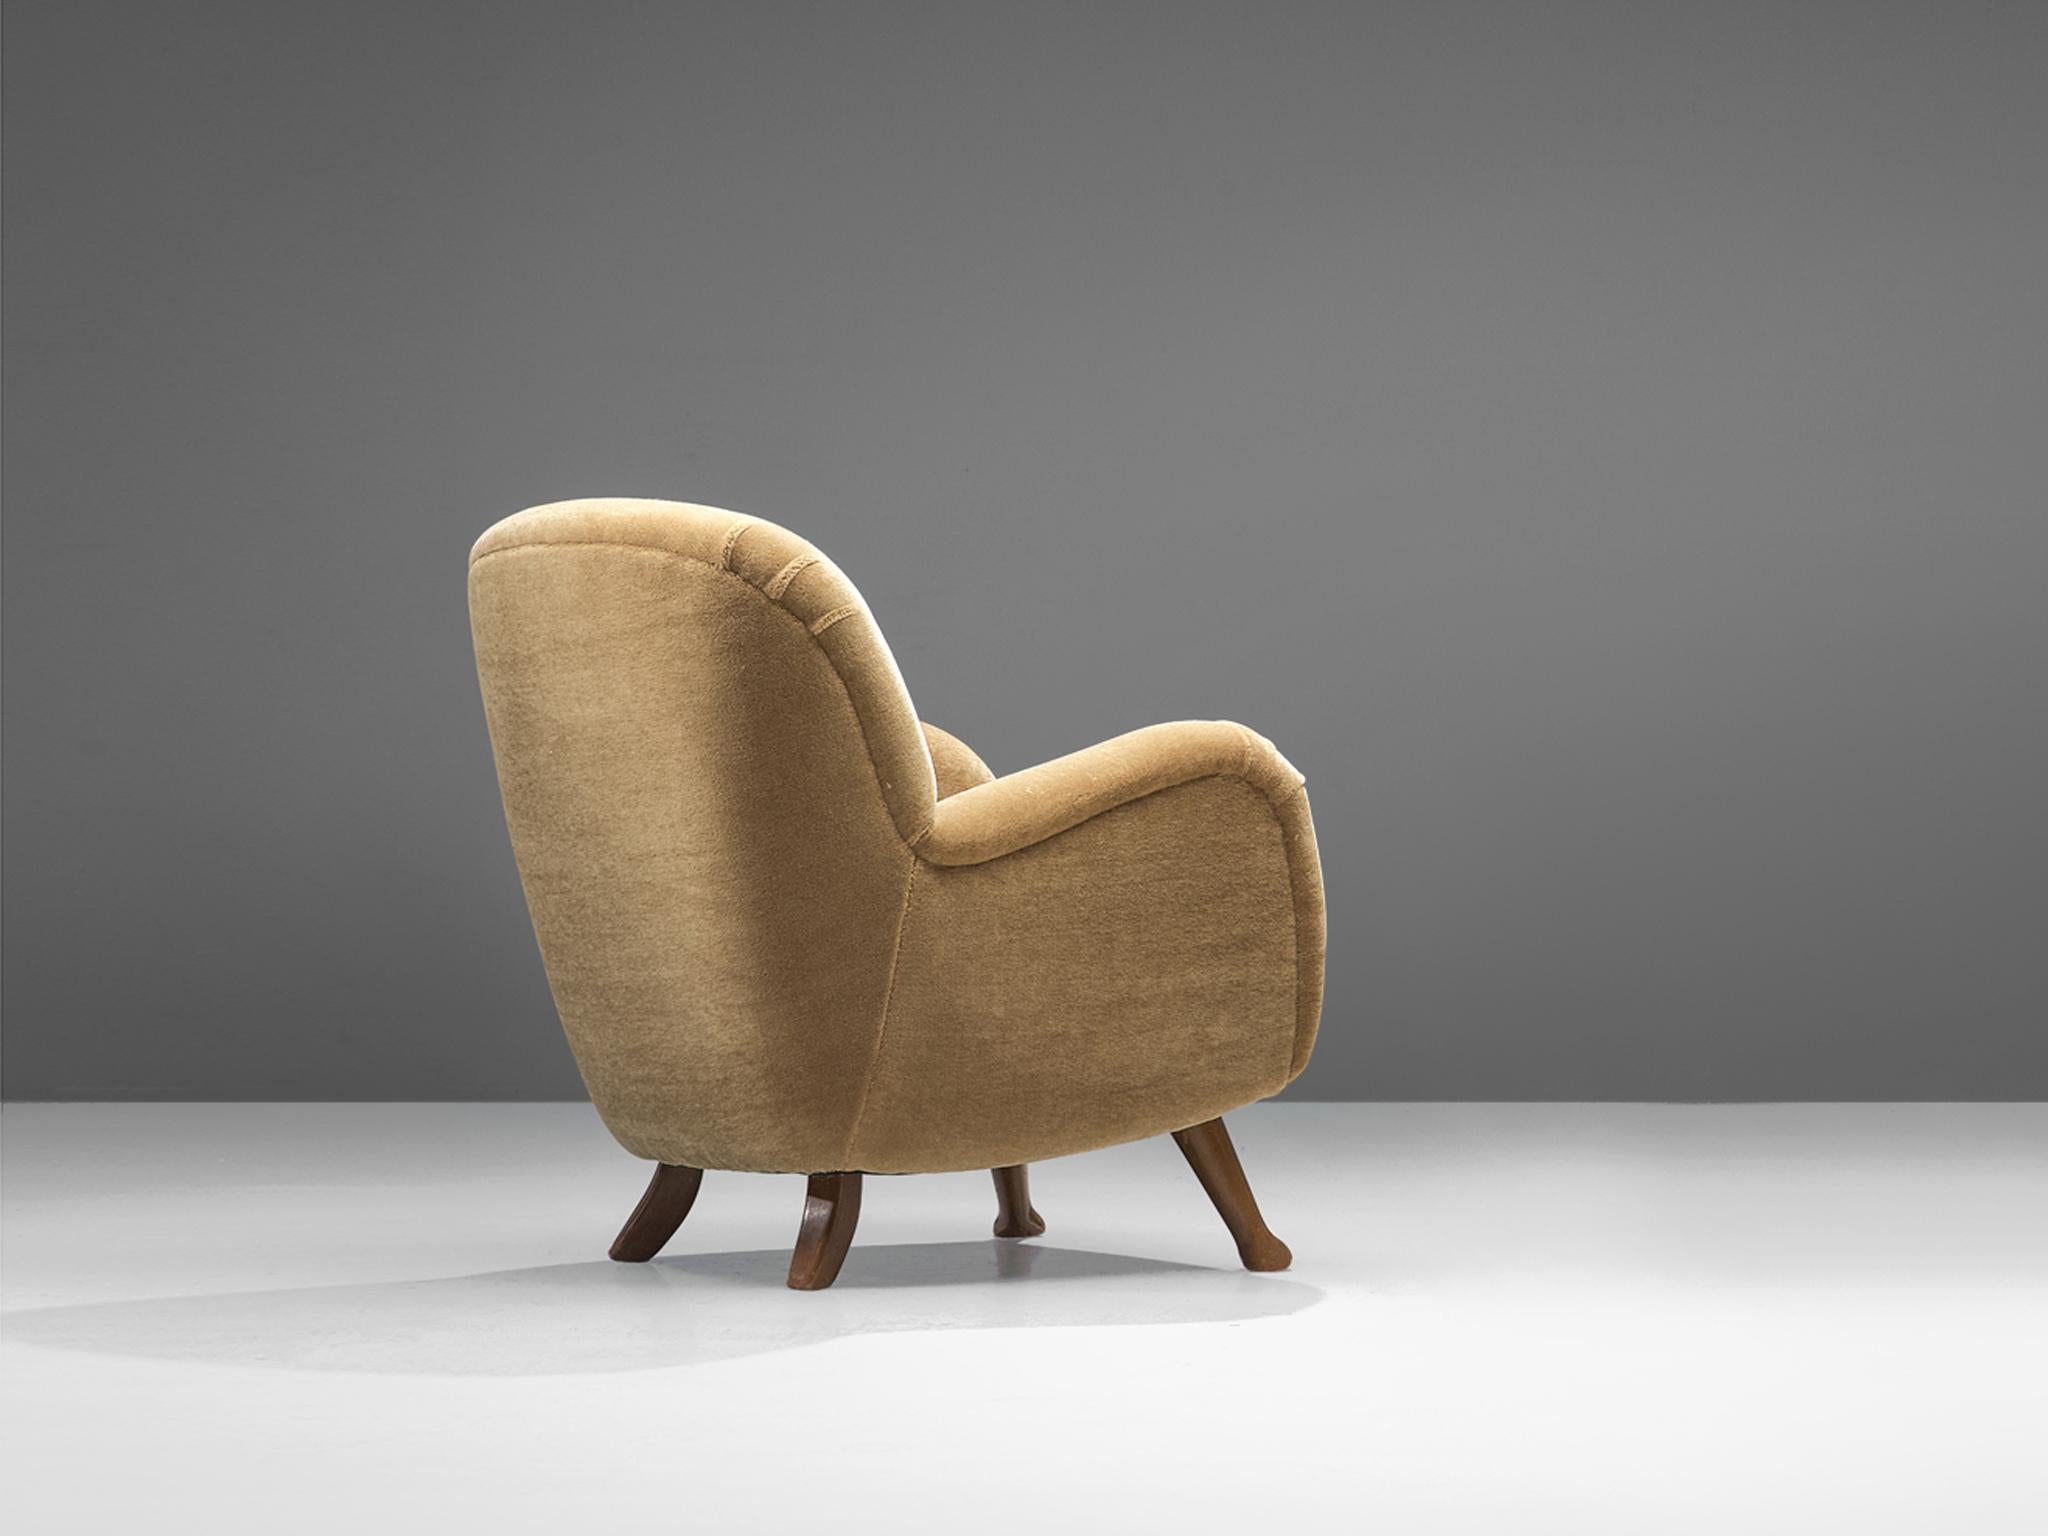 Mid-20th Century Berga Mobler Lounge Chair in Beige Teddy